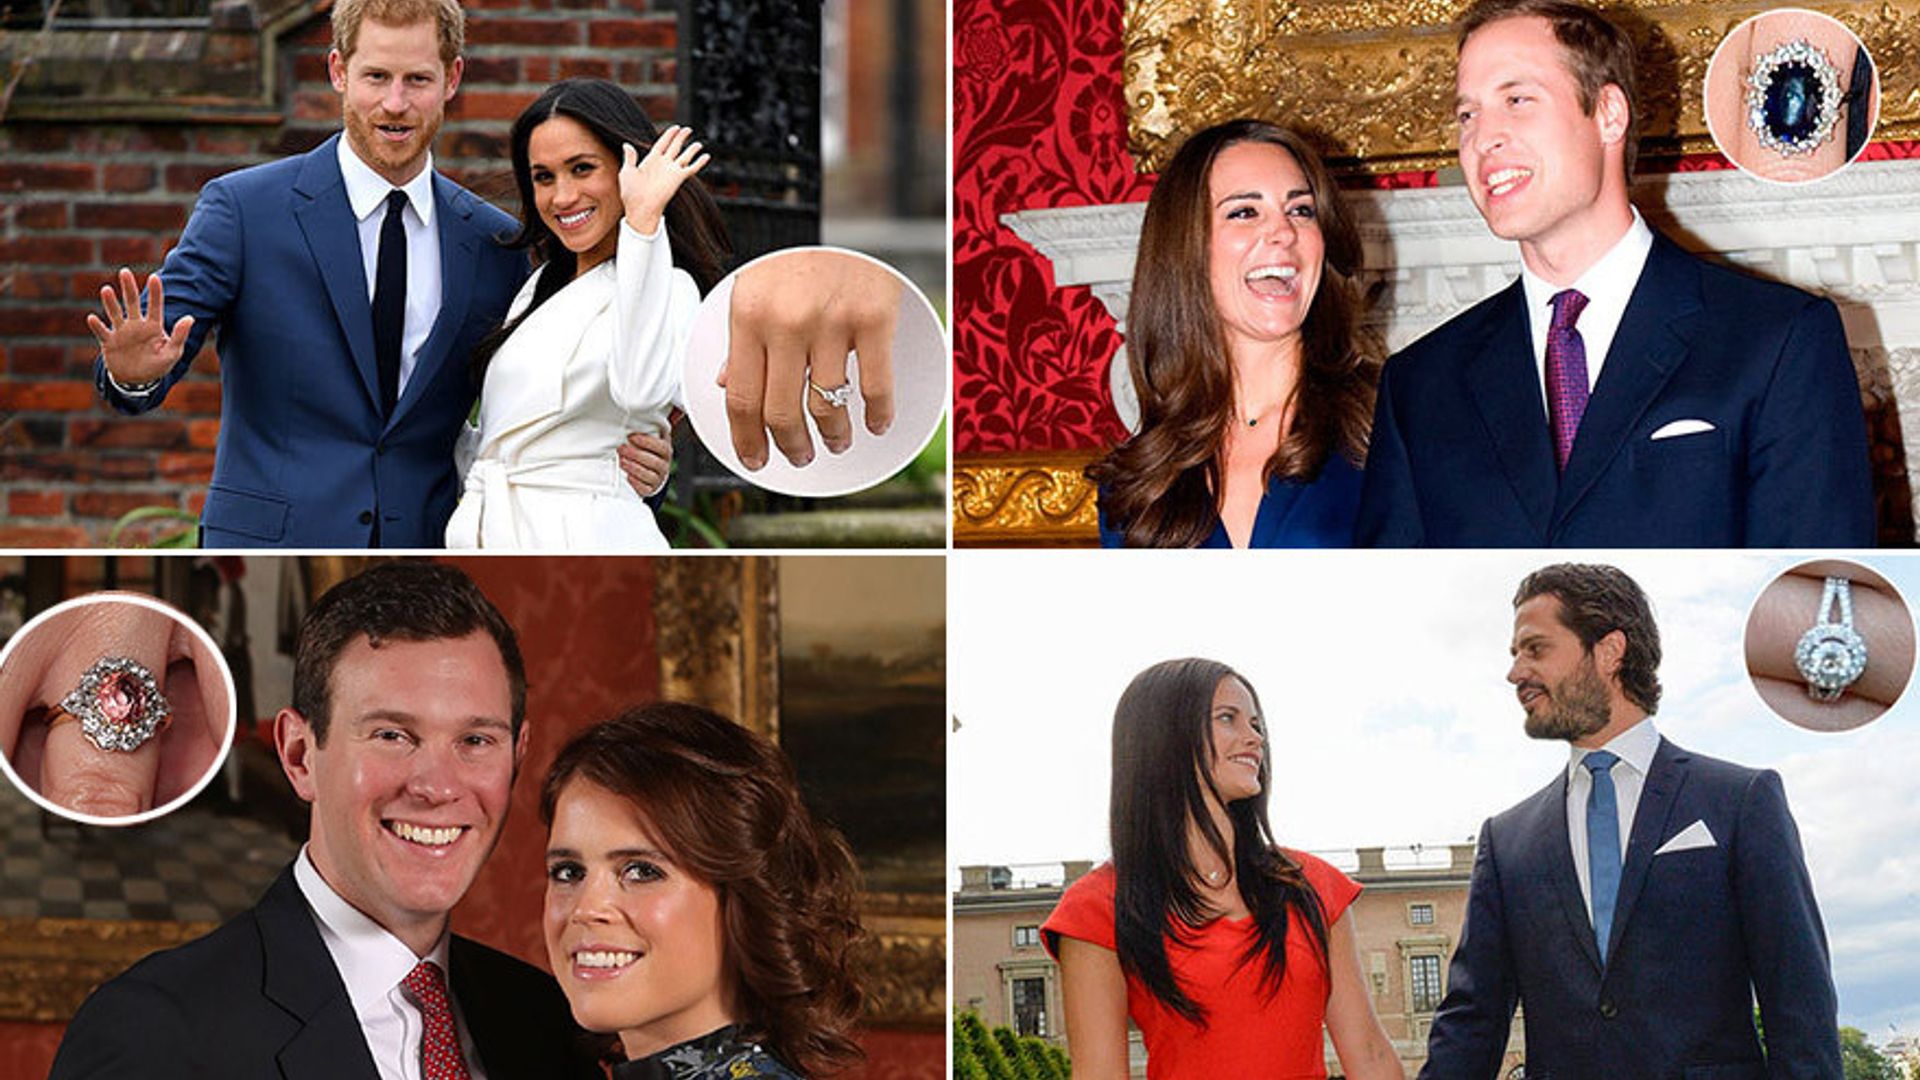 From Queen Elizabeth to Princess Eugenie: How the royals announced their engagements